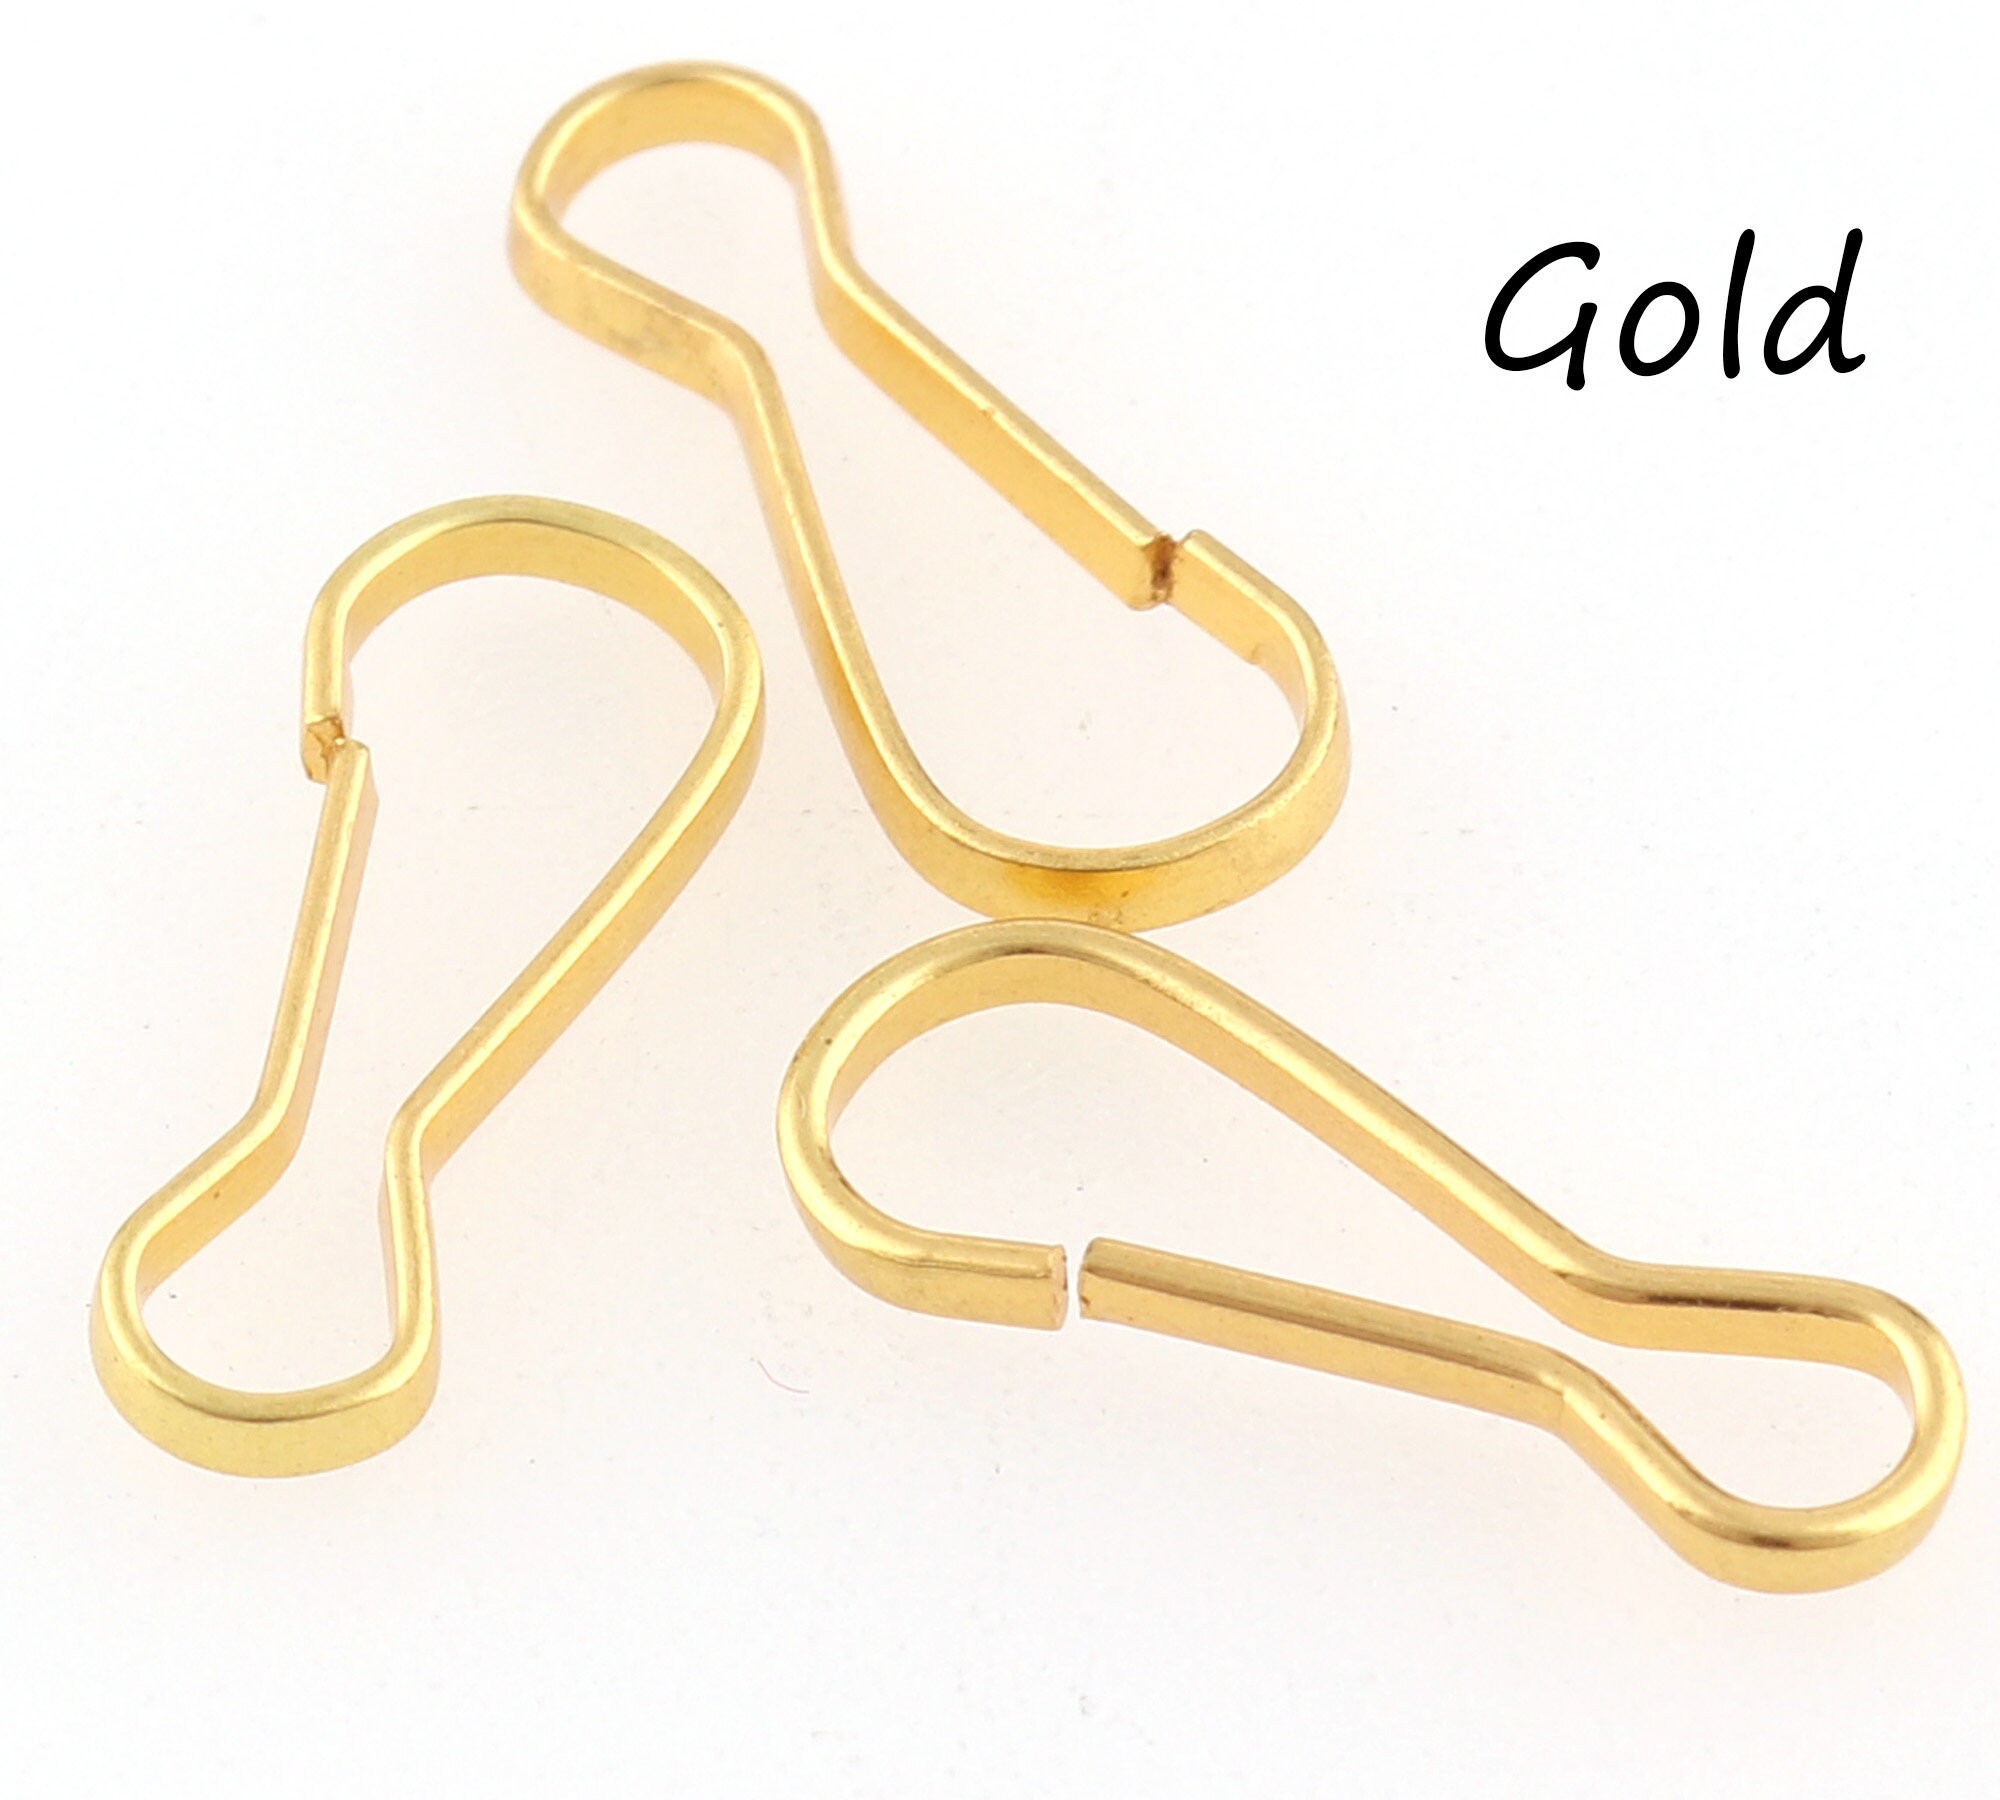 Lanyard Hooks,metal Lanyard Clips,accessory Clip,silver/gold/rose Gold DIY  Craft Supply,jewelry Supplies,bulk Craft for ID Card/keychain 